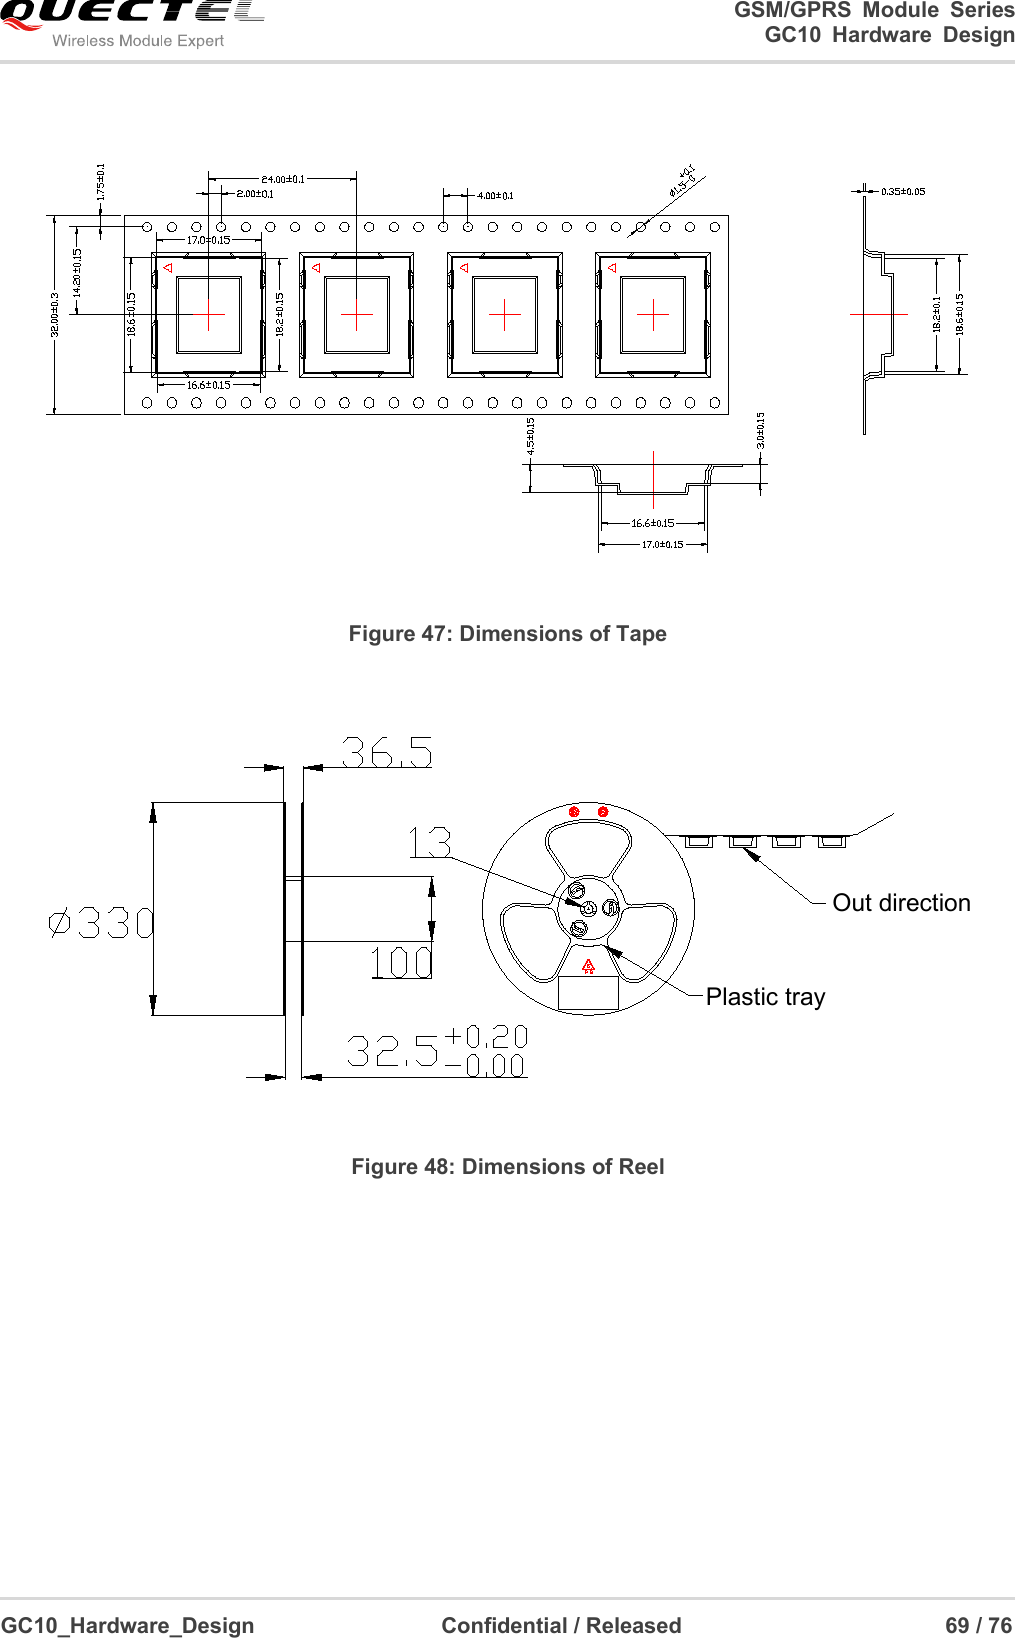                                                                          GSM/GPRS  Module  Series                                                                 GC10 Hardware Design  GC10_Hardware_Design                                  Confidential / Released                                                69 / 76       Figure 47: Dimensions of Tape Plastic trayOut direction Figure 48: Dimensions of Reel    